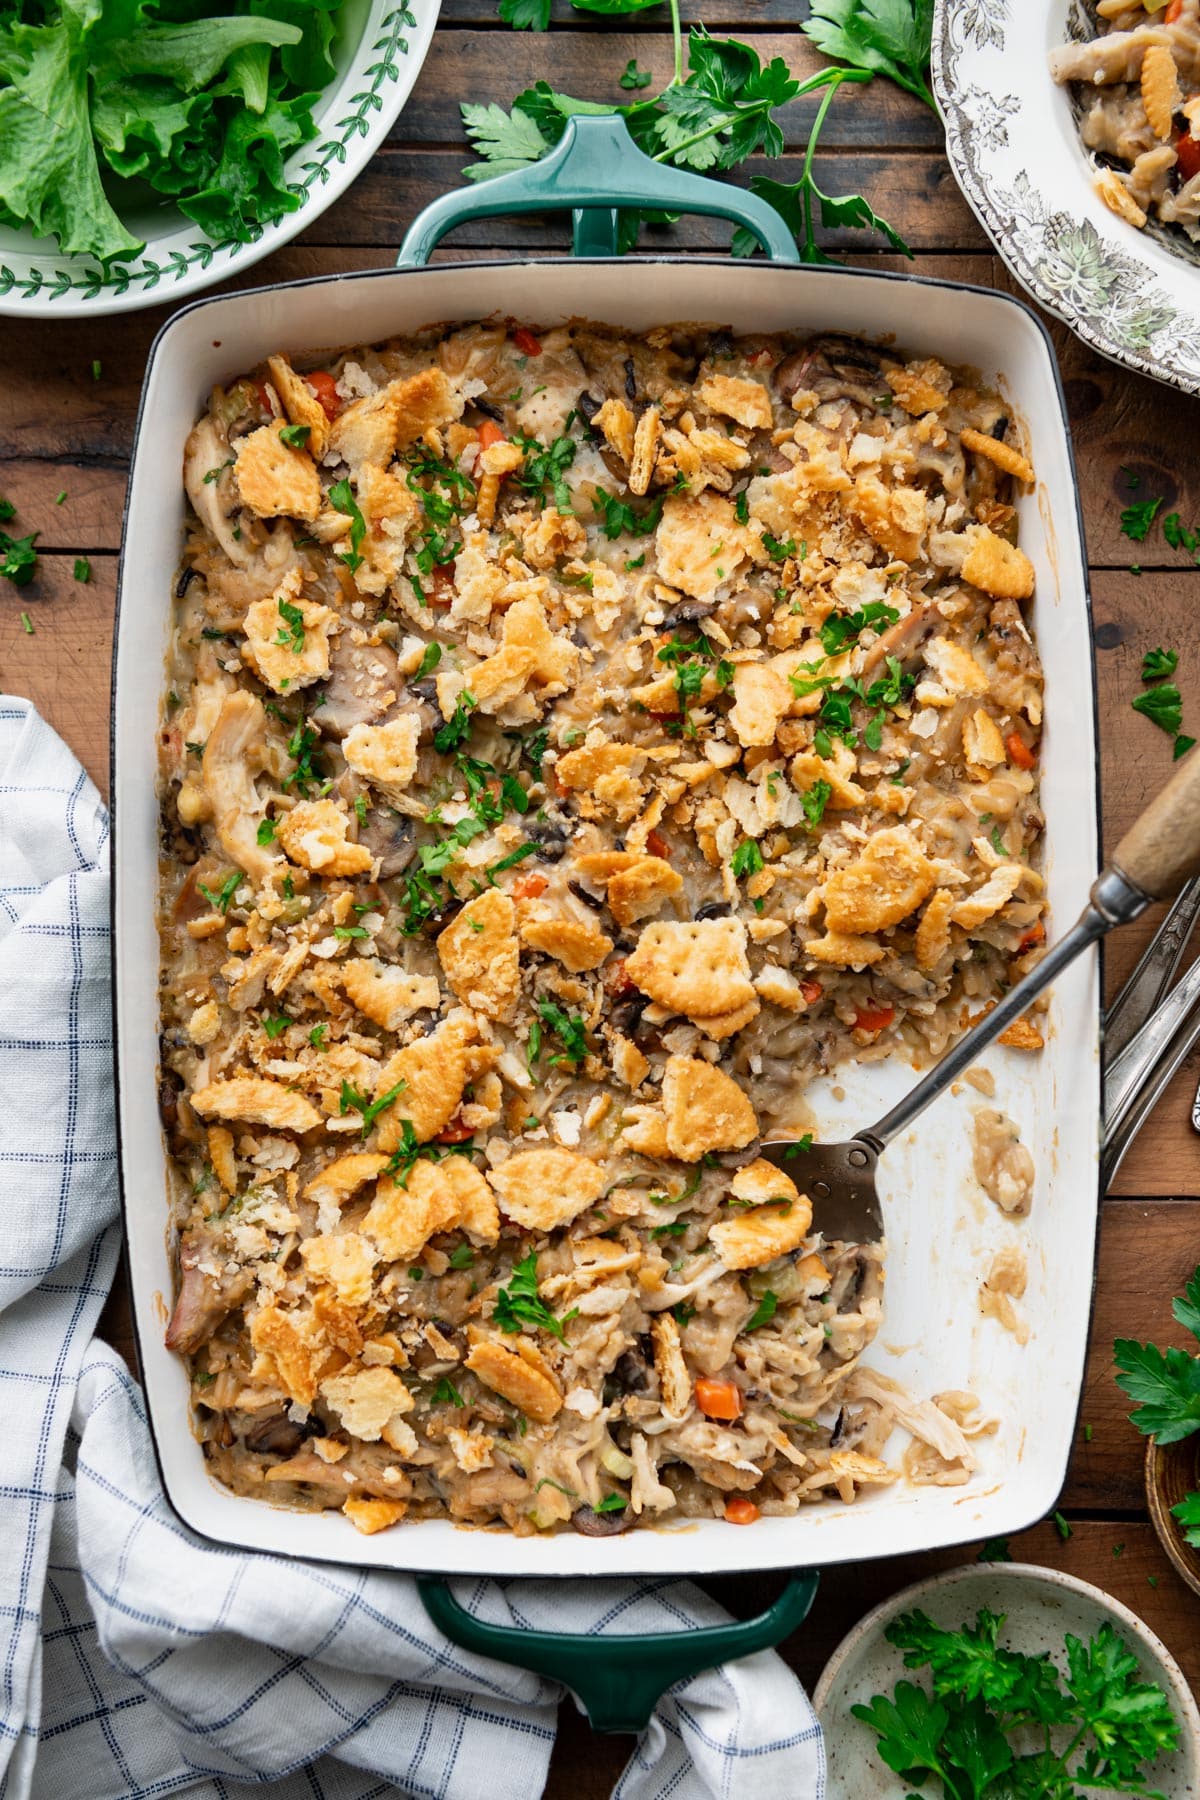 Overhead image of chicken and wild rice casserole in a baking dish on a wooden table.